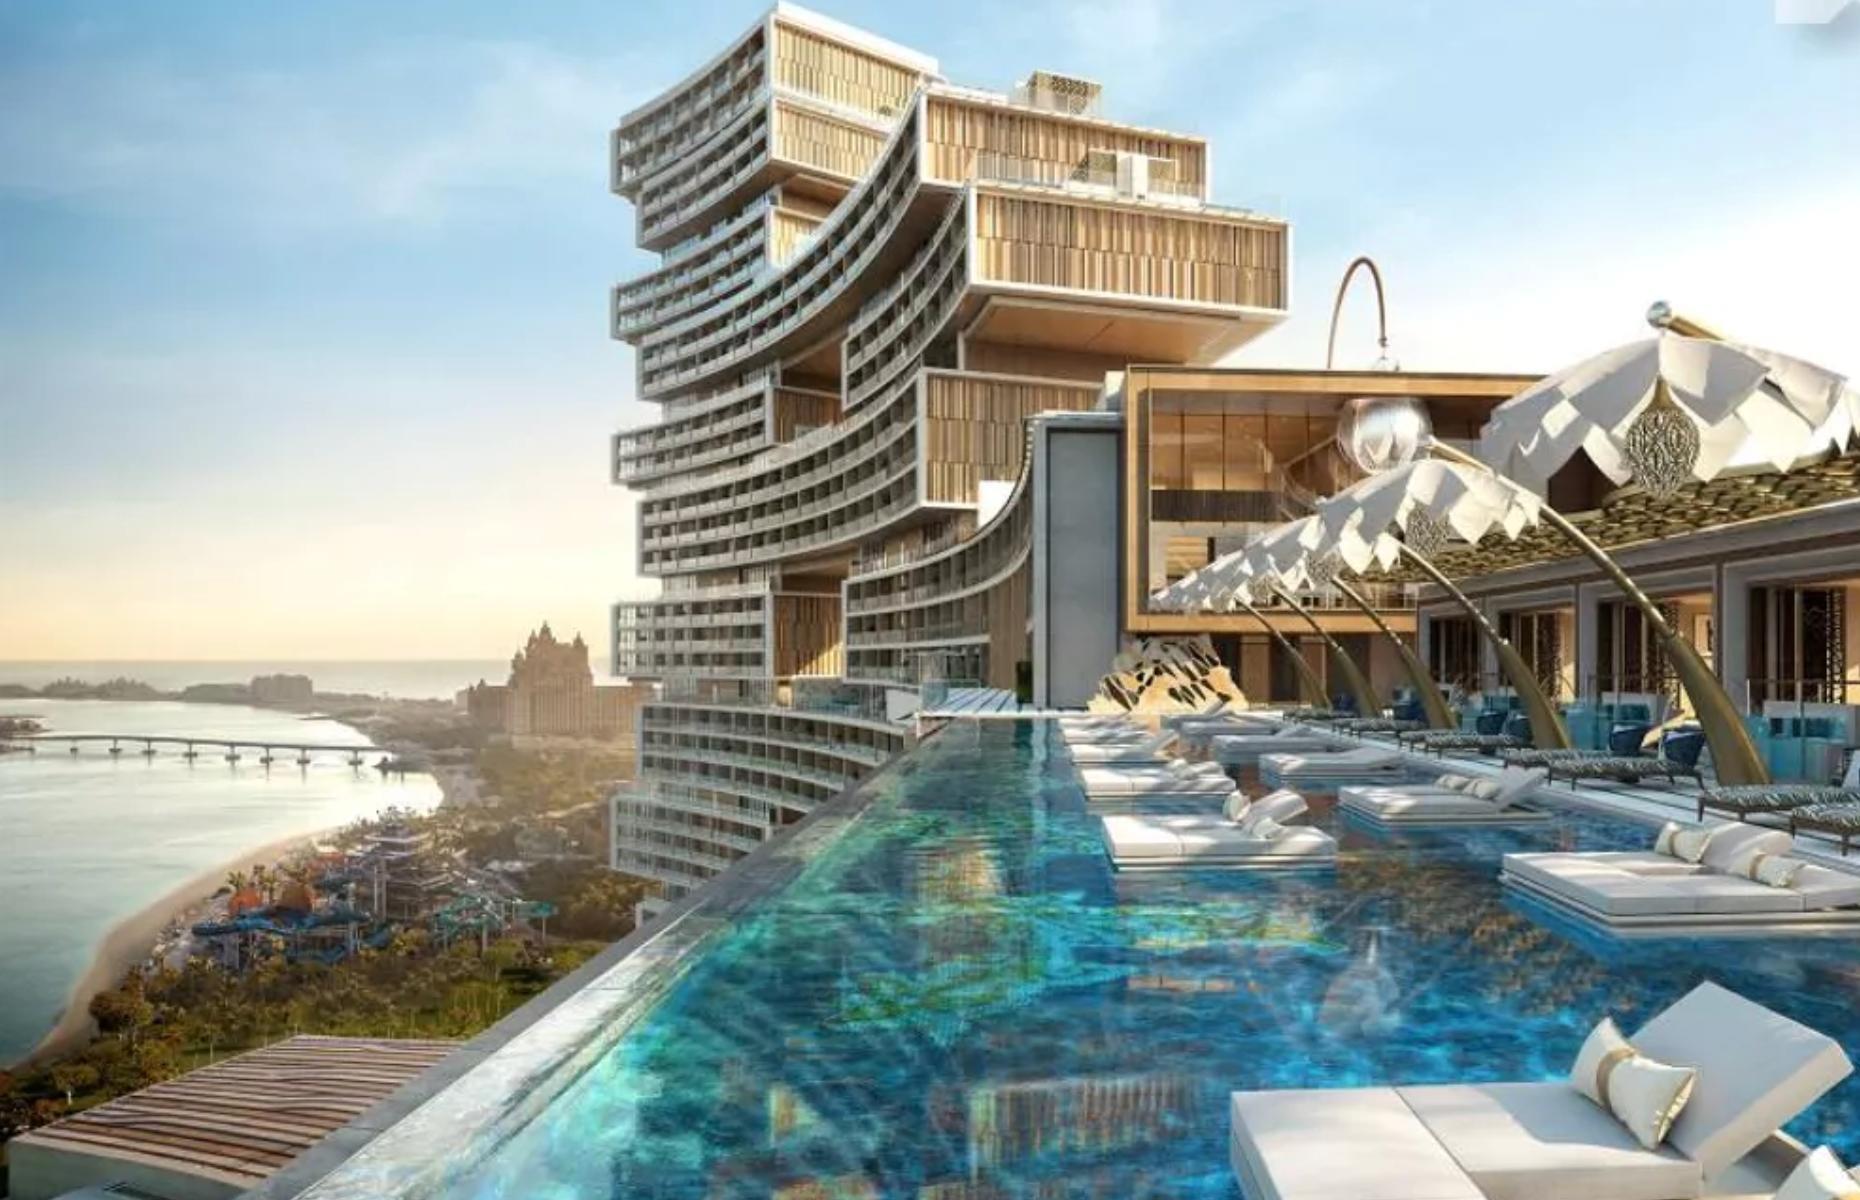 <p>Property is booming in Dubai and the largest penthouse at Atlantis The Royal Residences <a href="https://www.thenationalnews.com/business/property/2022/08/24/atlantis-the-royal-residences-penthouse-sells-for-444m-as-prime-dubai-property-booms/">sold</a> in August 2022 for $44.4 million, in what was thought to be the year's biggest sale. The distinctive honeycomb twin tower structure is straight out of a mythical world and was designed by celebrated New York architects Kohn Pedersen Fox, who have designed some of the world’s tallest buildings, including the CITIC Tower in Beijing. </p>